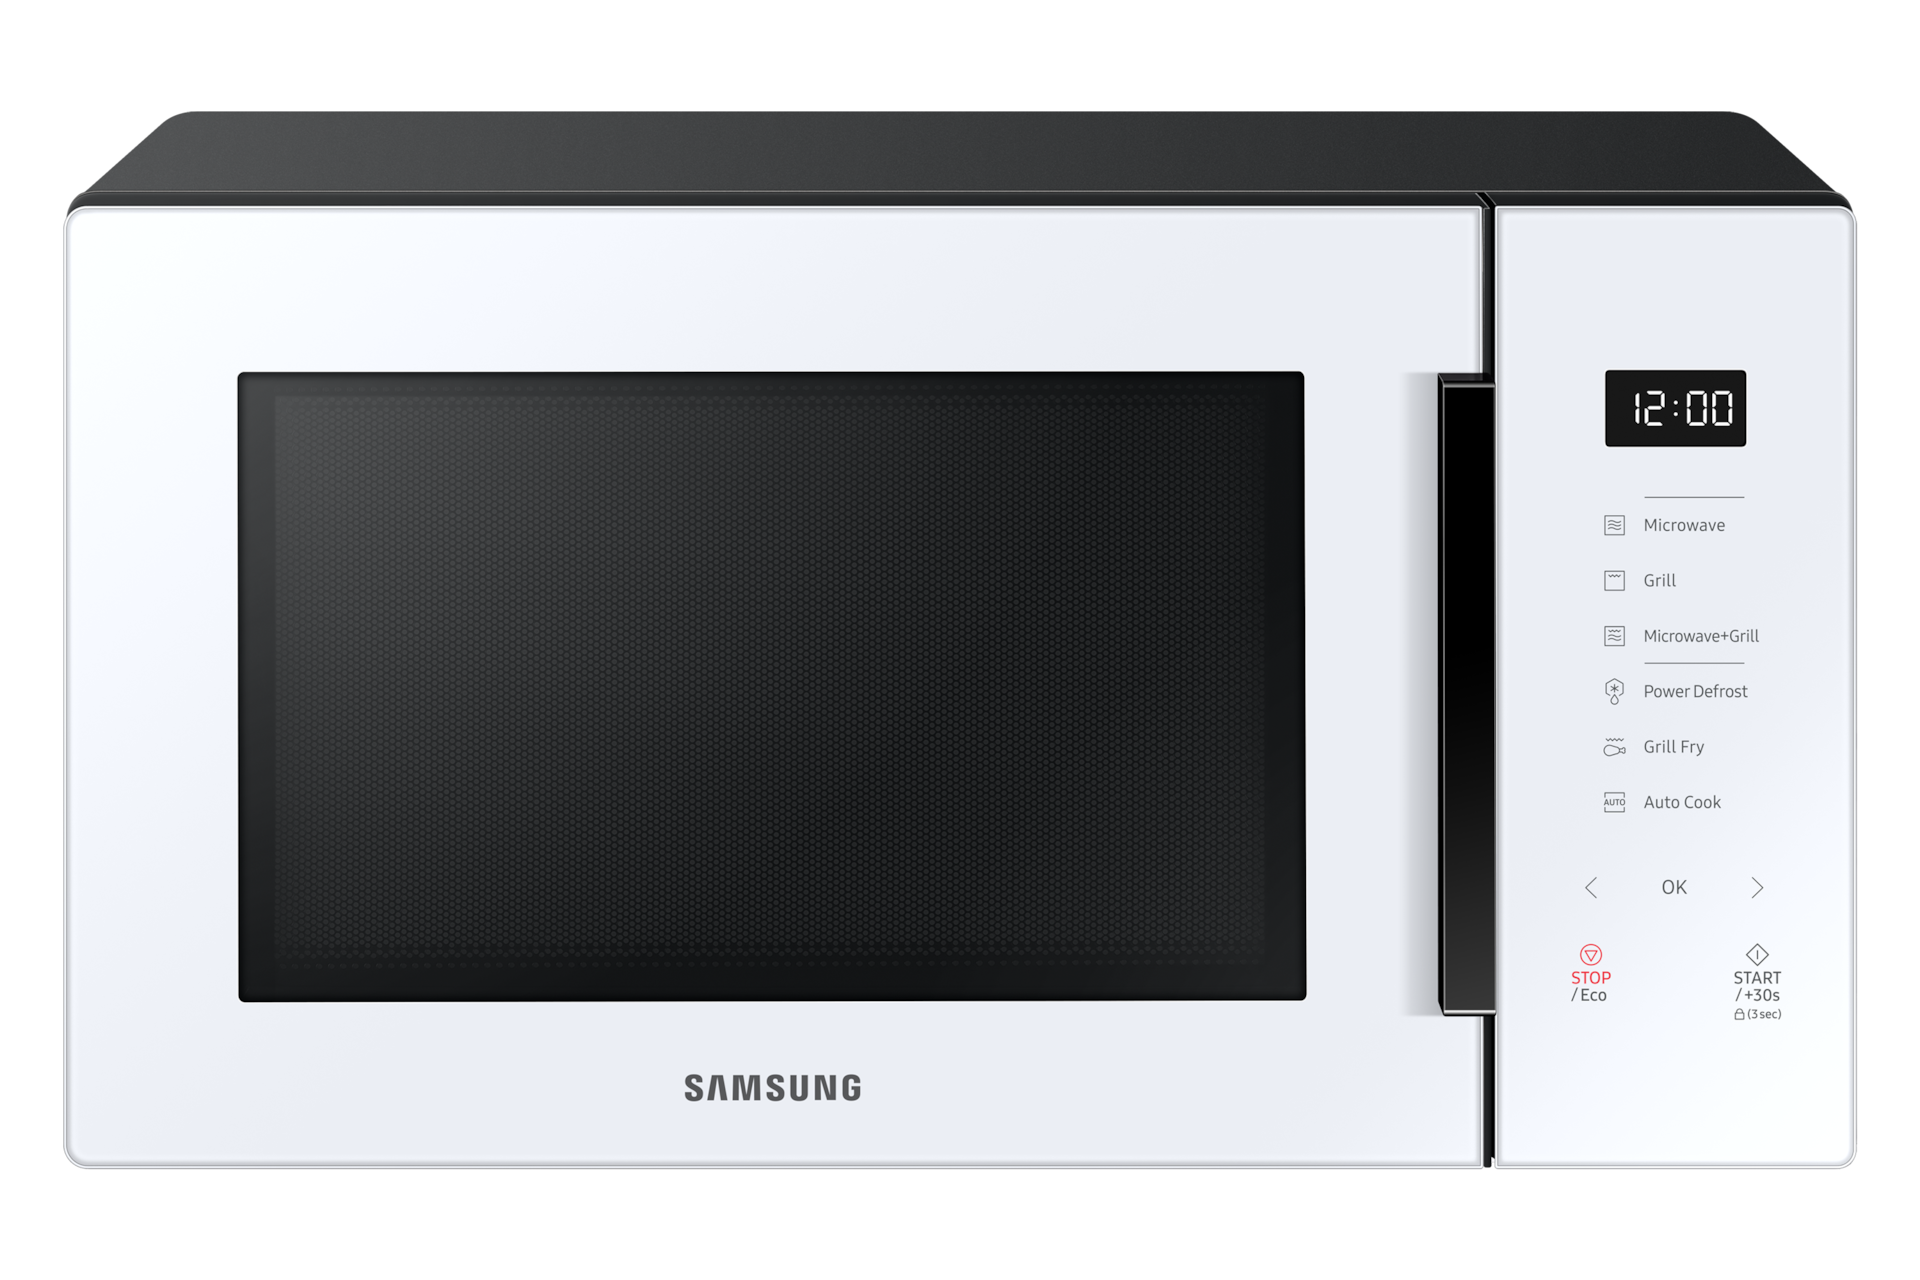 Buy Samsung 30L Microwave Grill Oven online